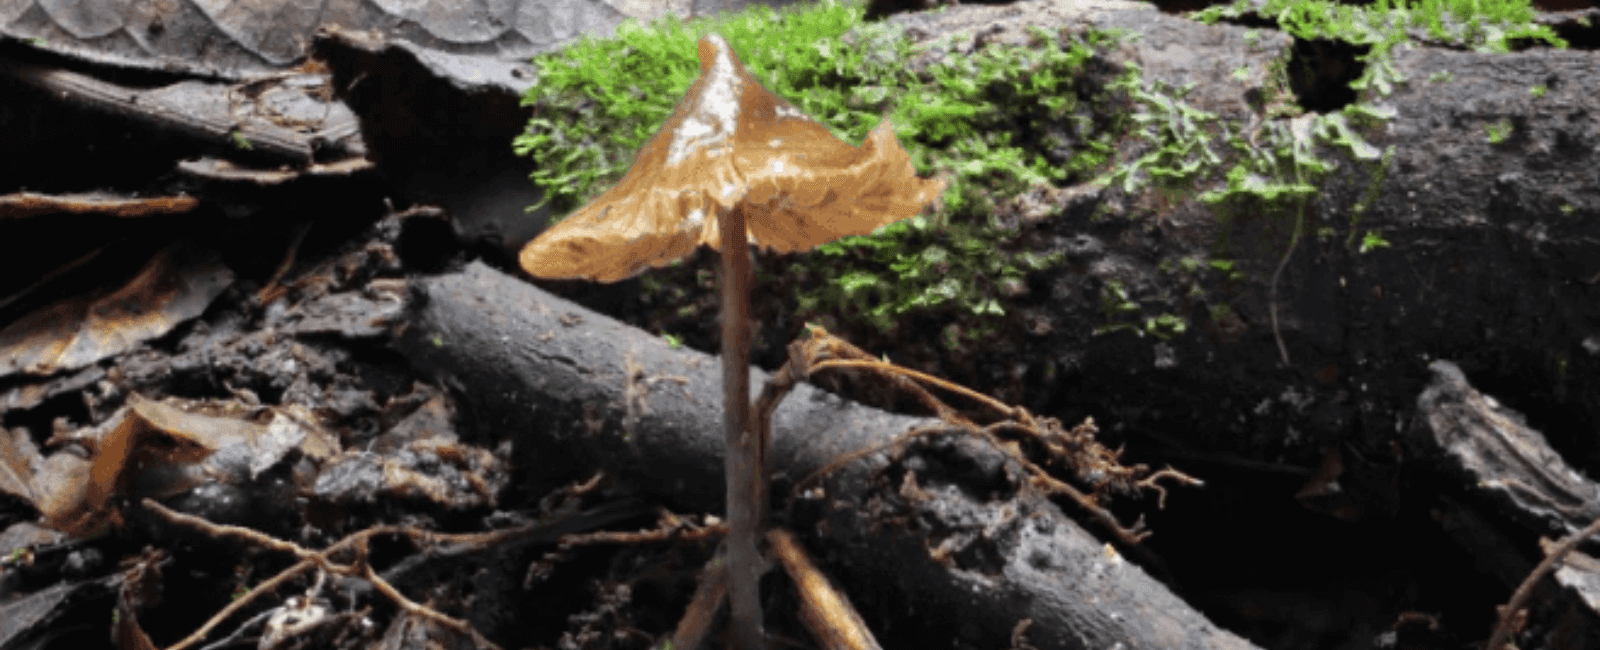 Mycologist Paul Stamets Honored with a Newly Discovered Magic Mushroom